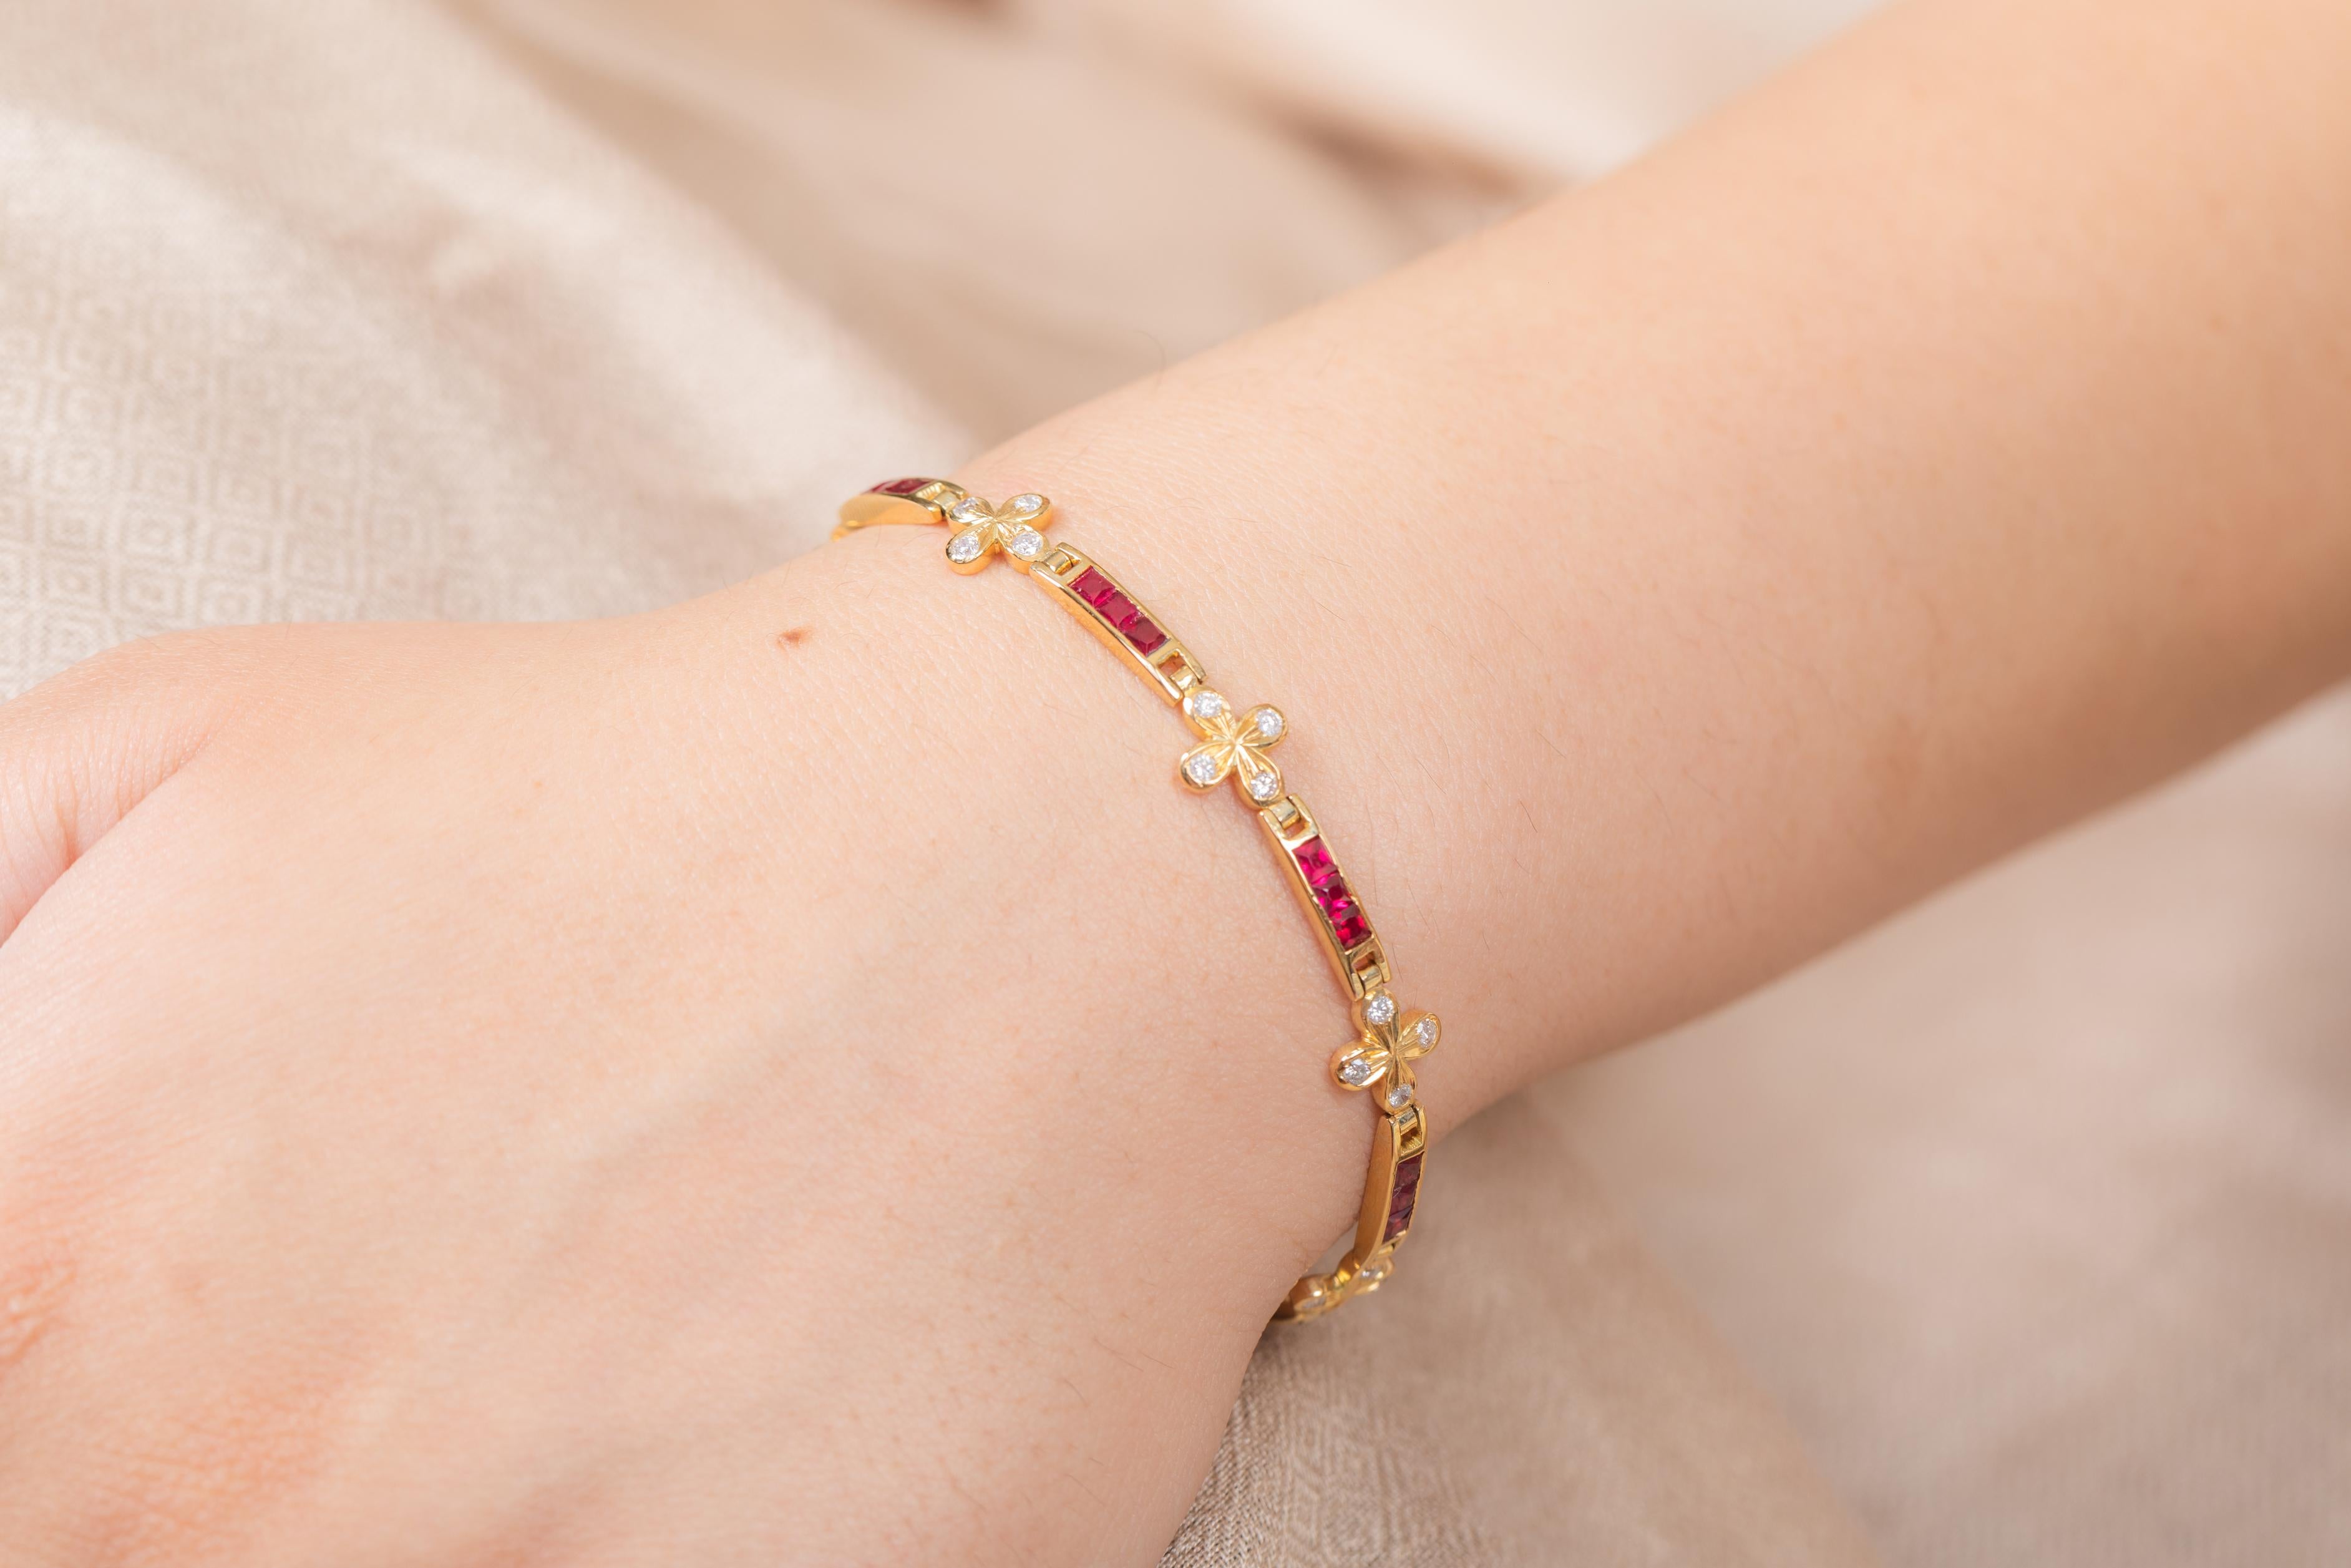 The wearing of charms may have begun as a form of amulet or talisman to ward off evil spirits or bad luck.
This ruby bracelet has a square cut gemstone and diamonds in 18K Gold. A perfect piece of jewelry to adorn your jewelry section.

PRODUCT